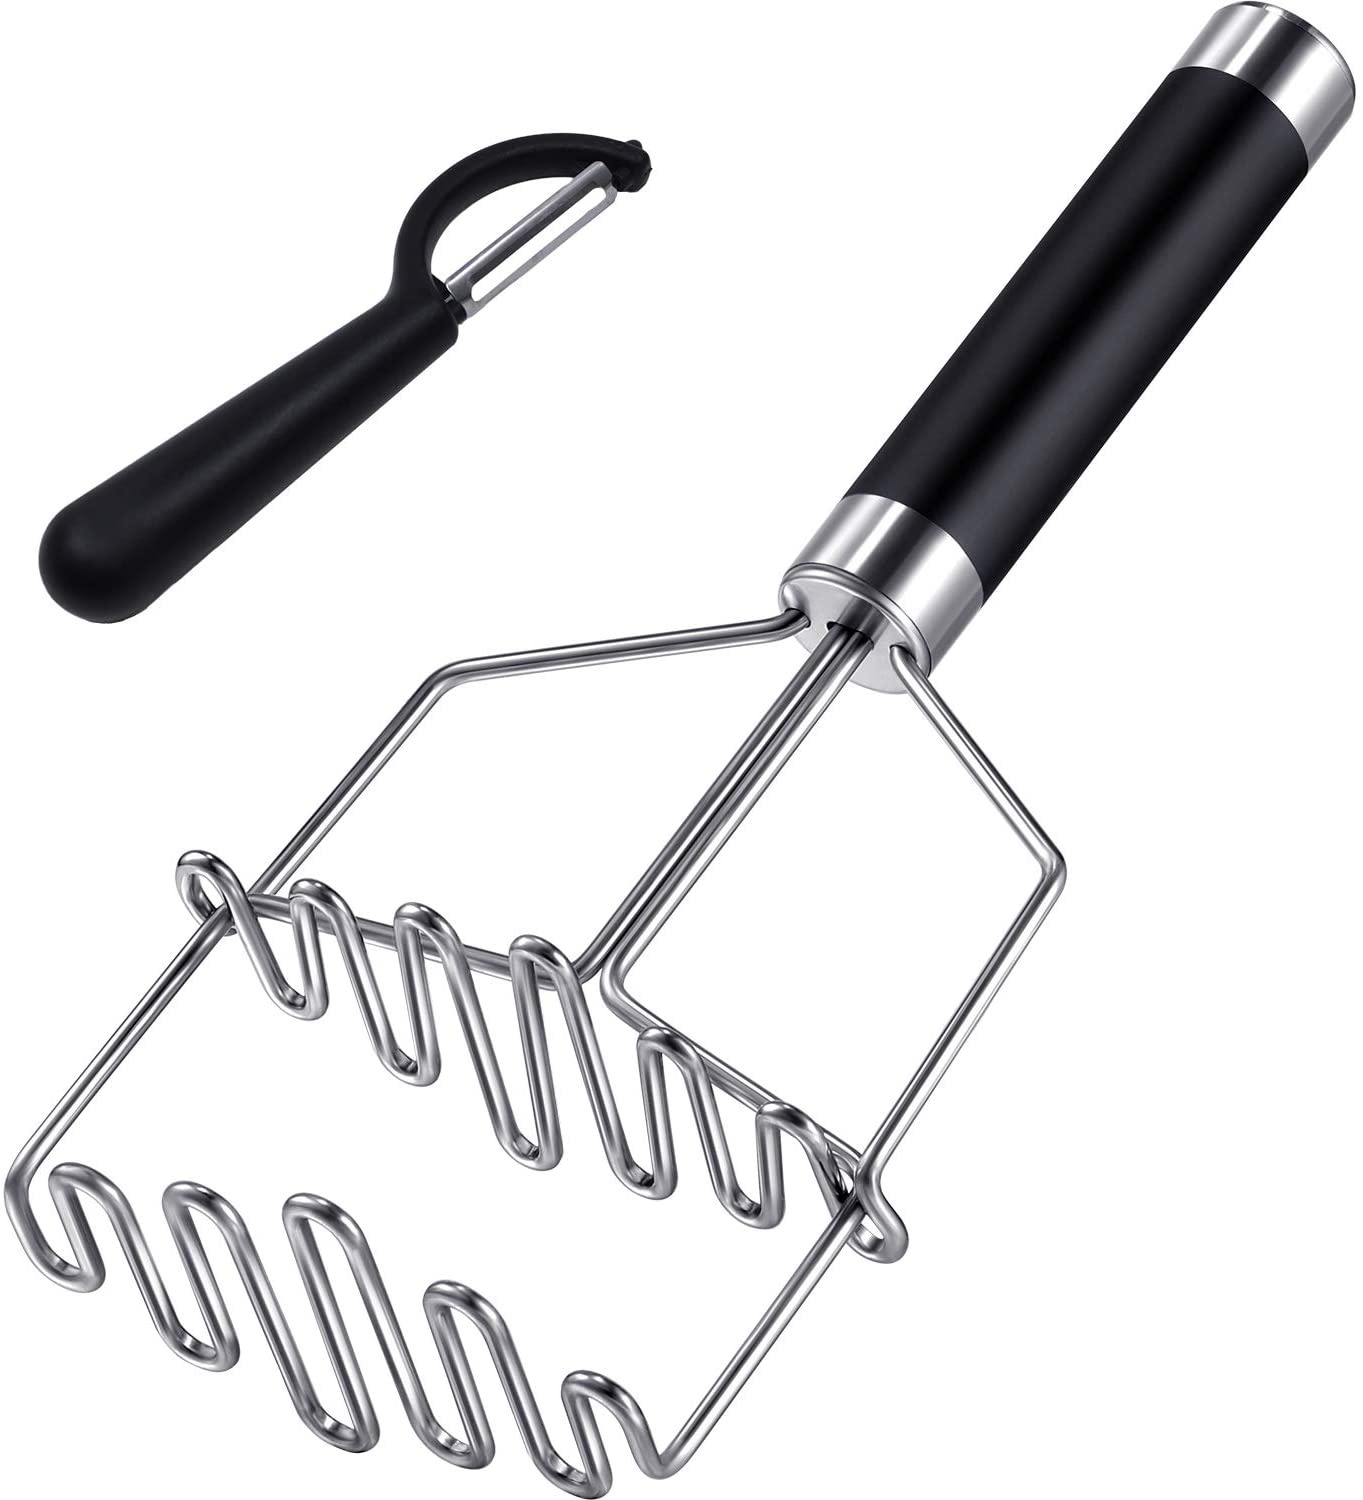 Potato Masher Double Layers Wire Smasher Stainless Steel Heavy Duty Masher